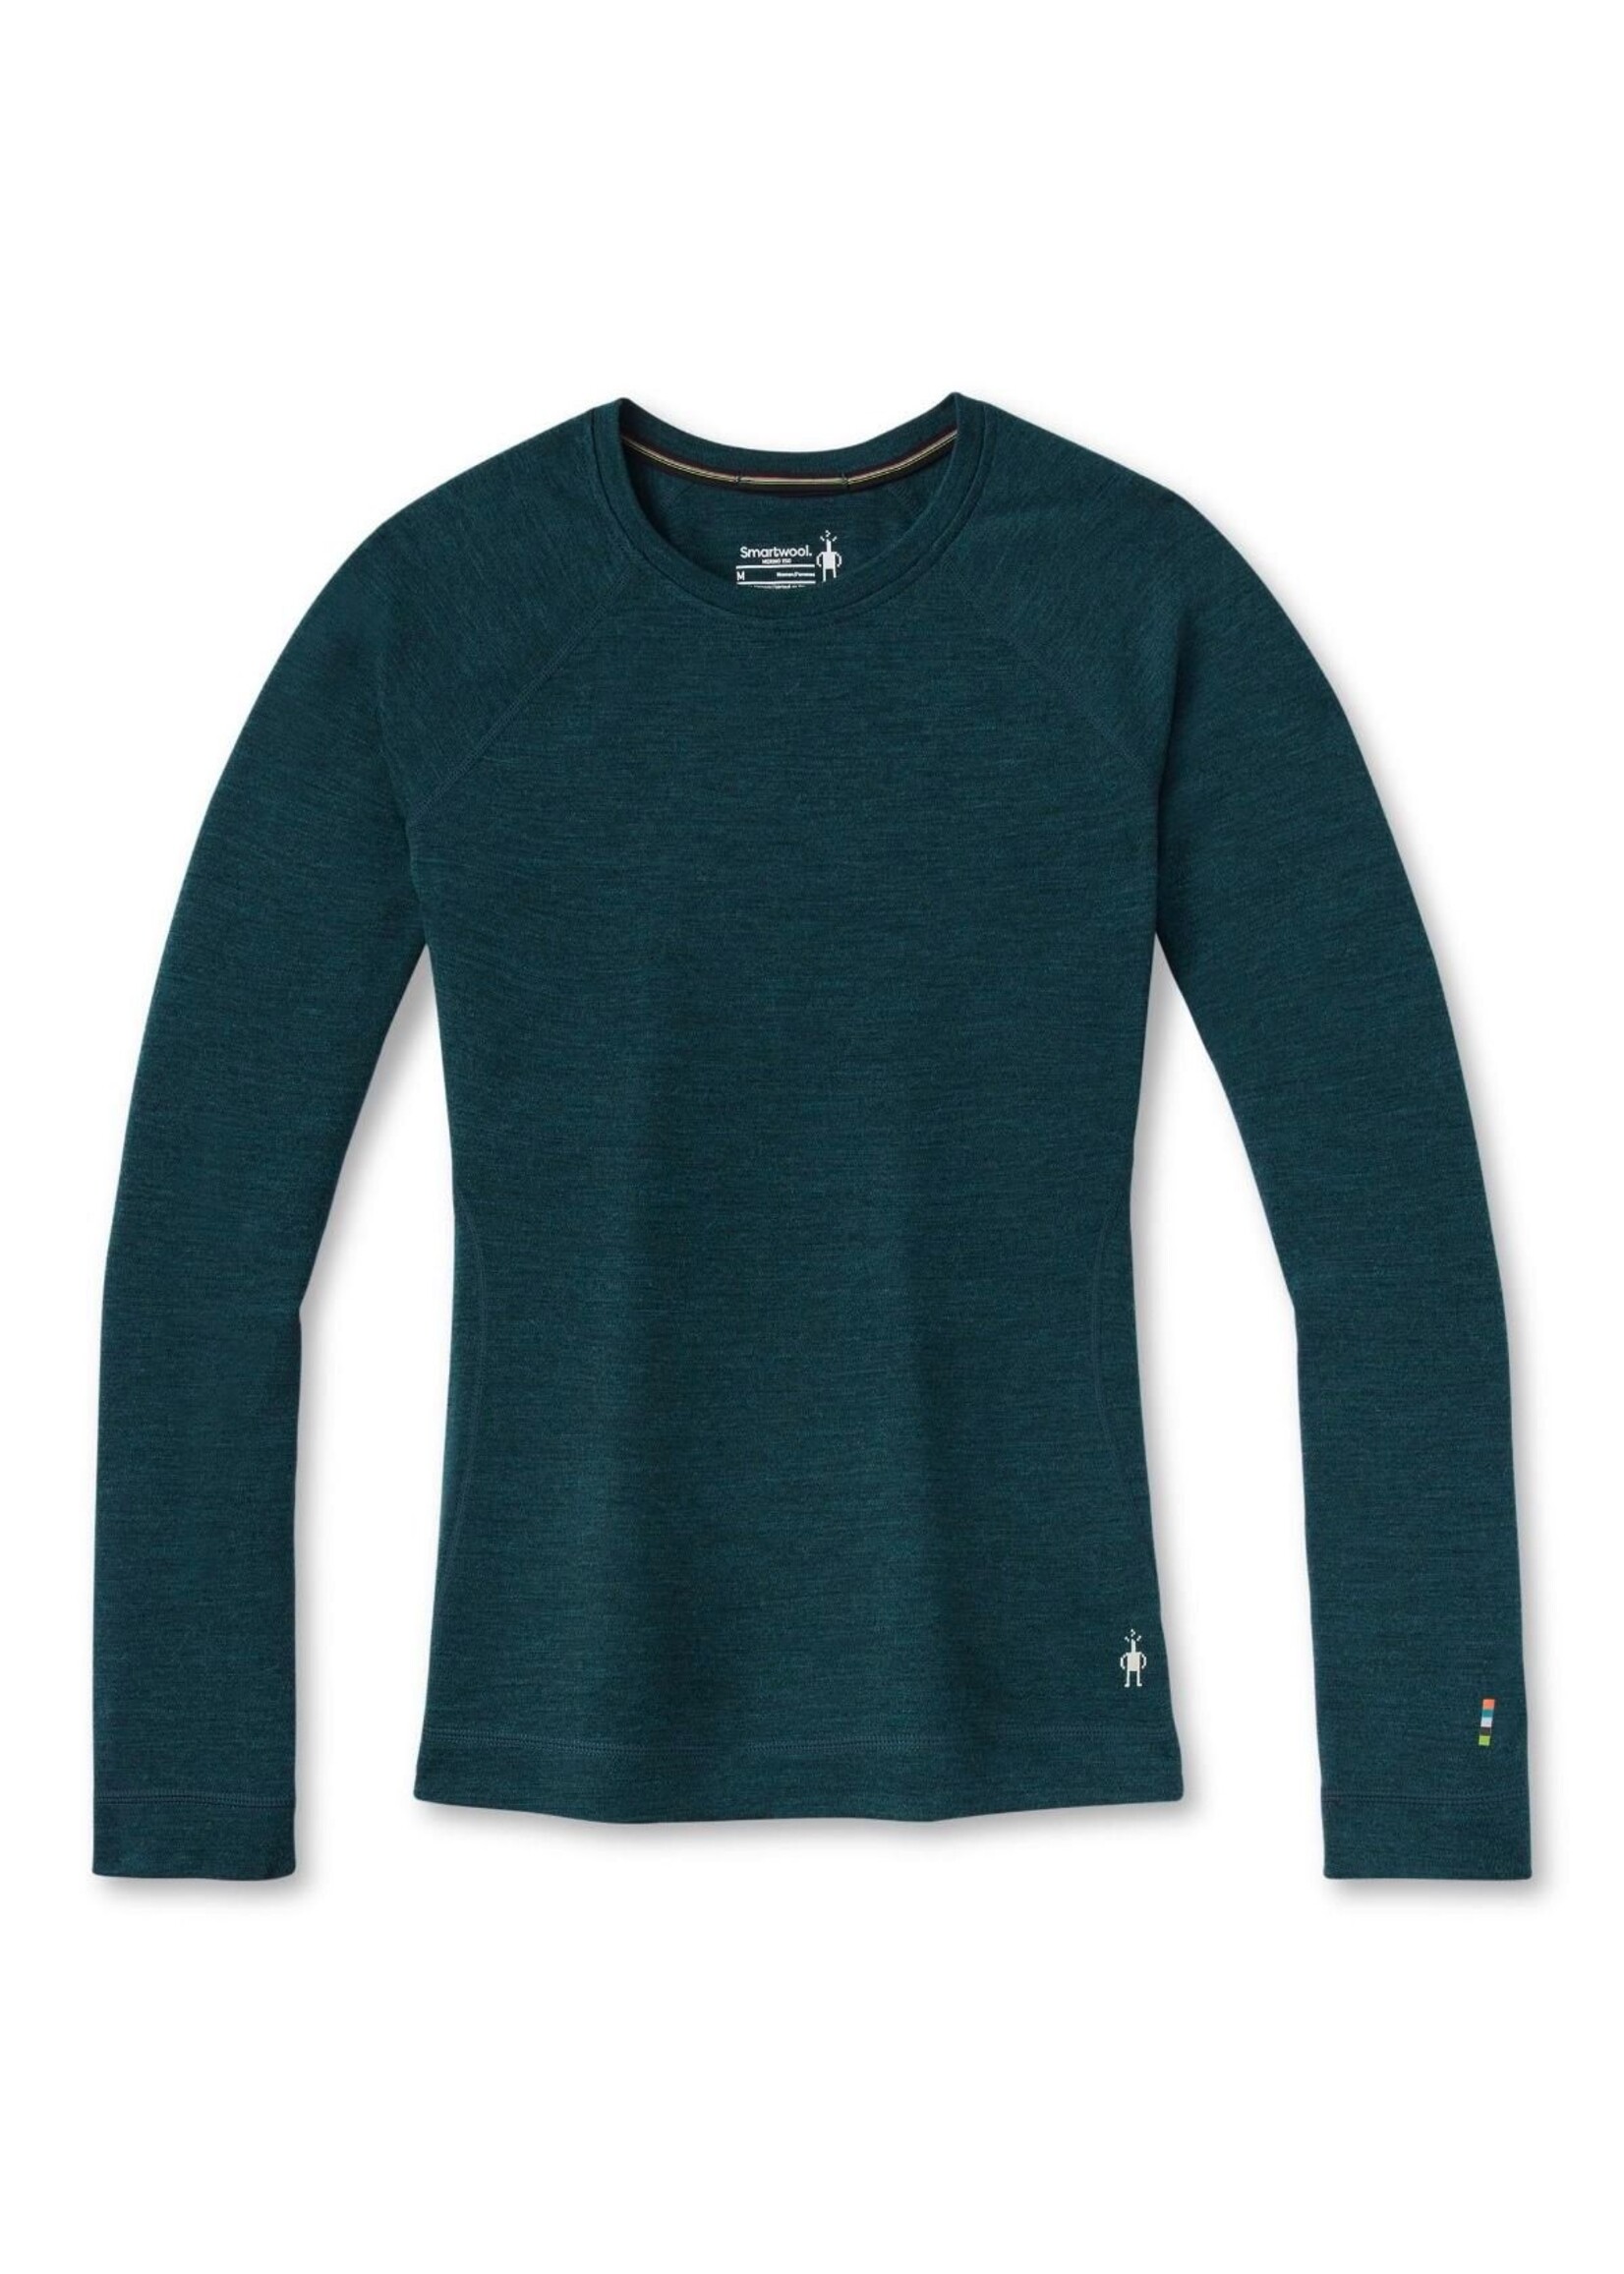 Smartwool Smartwool Ws Classic Thermal Merino Base Layer Crew Boxed